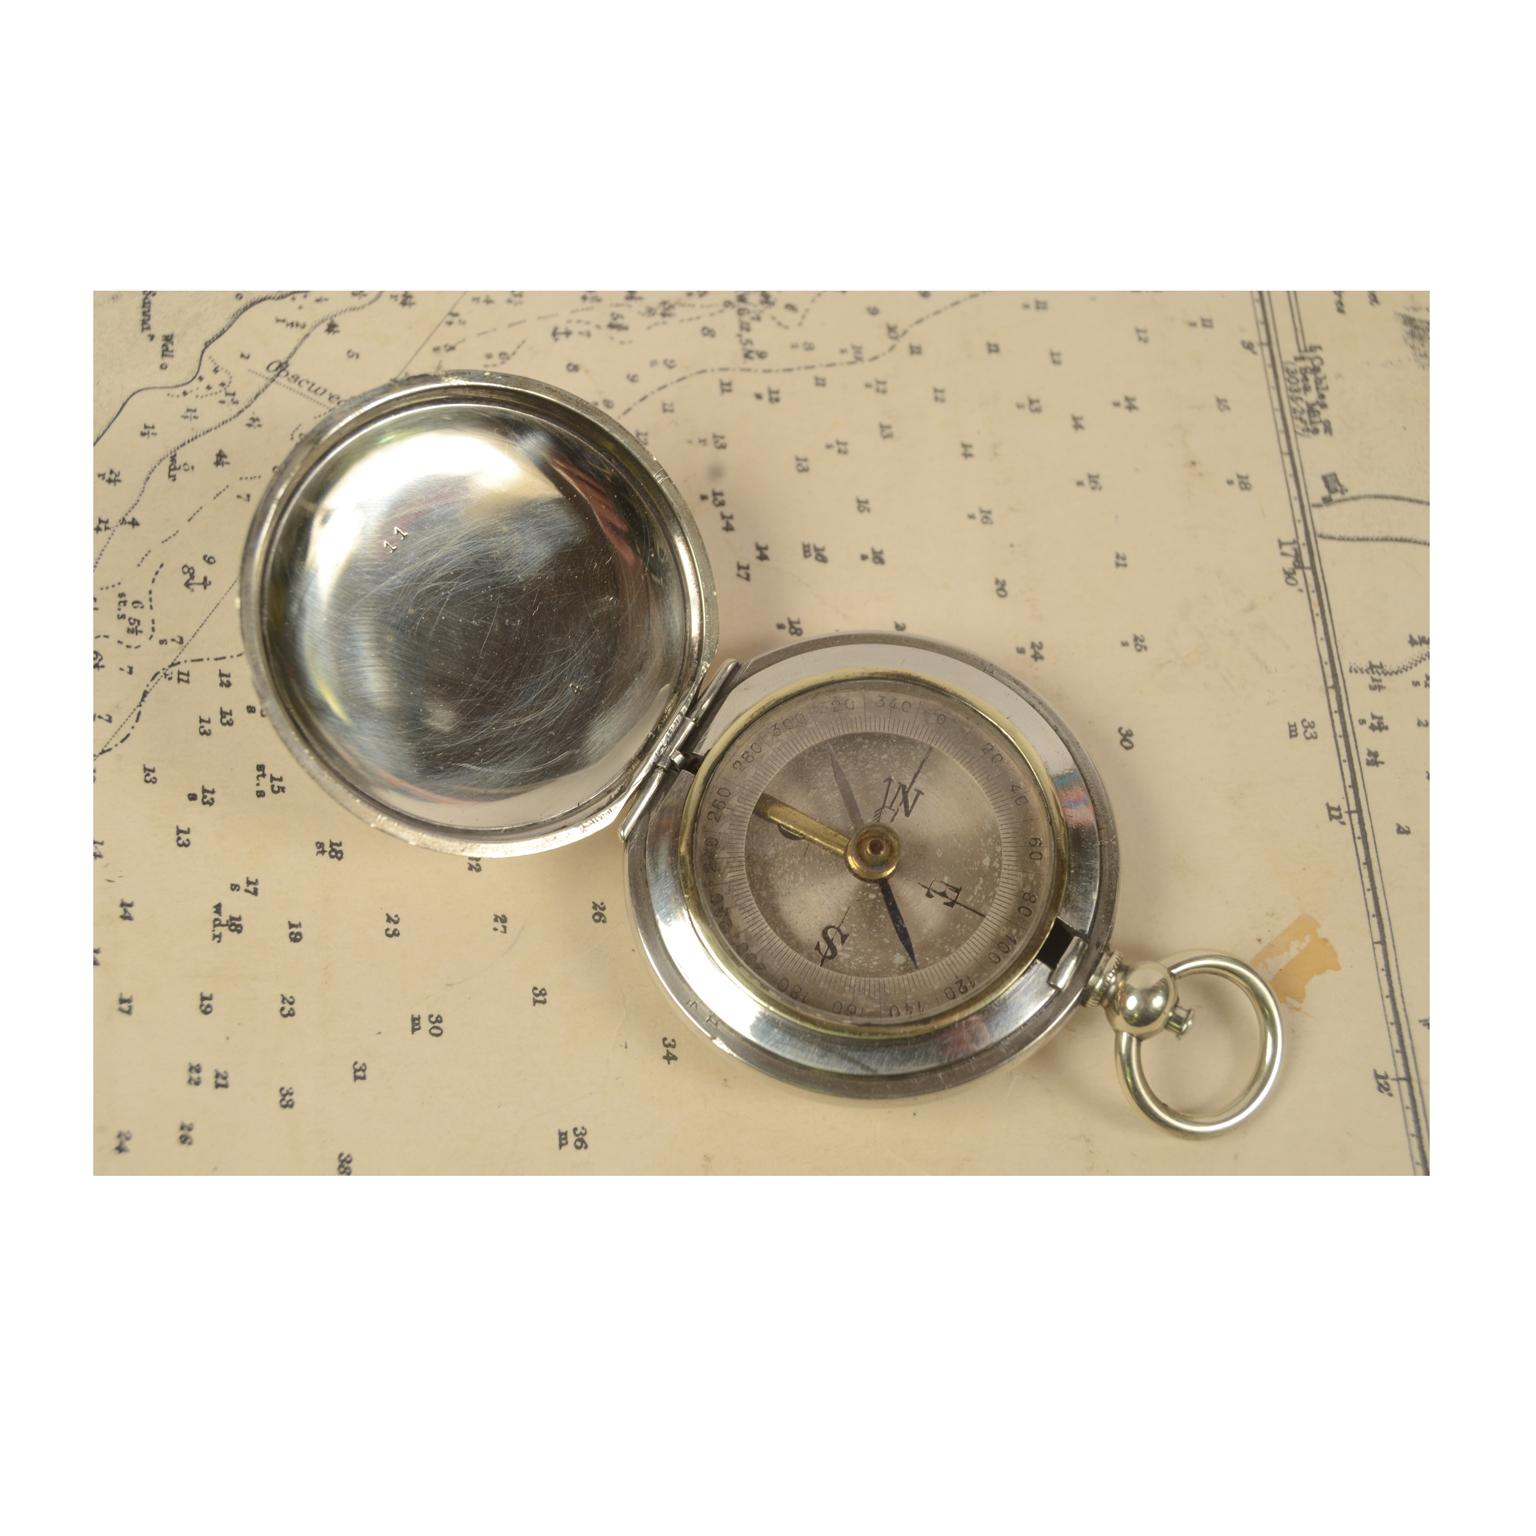 Pocket compass made of chromed brass in the shape of a pocket watch, and equipped with a lid with snap closure with release button inside the ring. Four-winds compass card complete with goniometric circle for calculating horizontal angles. Good